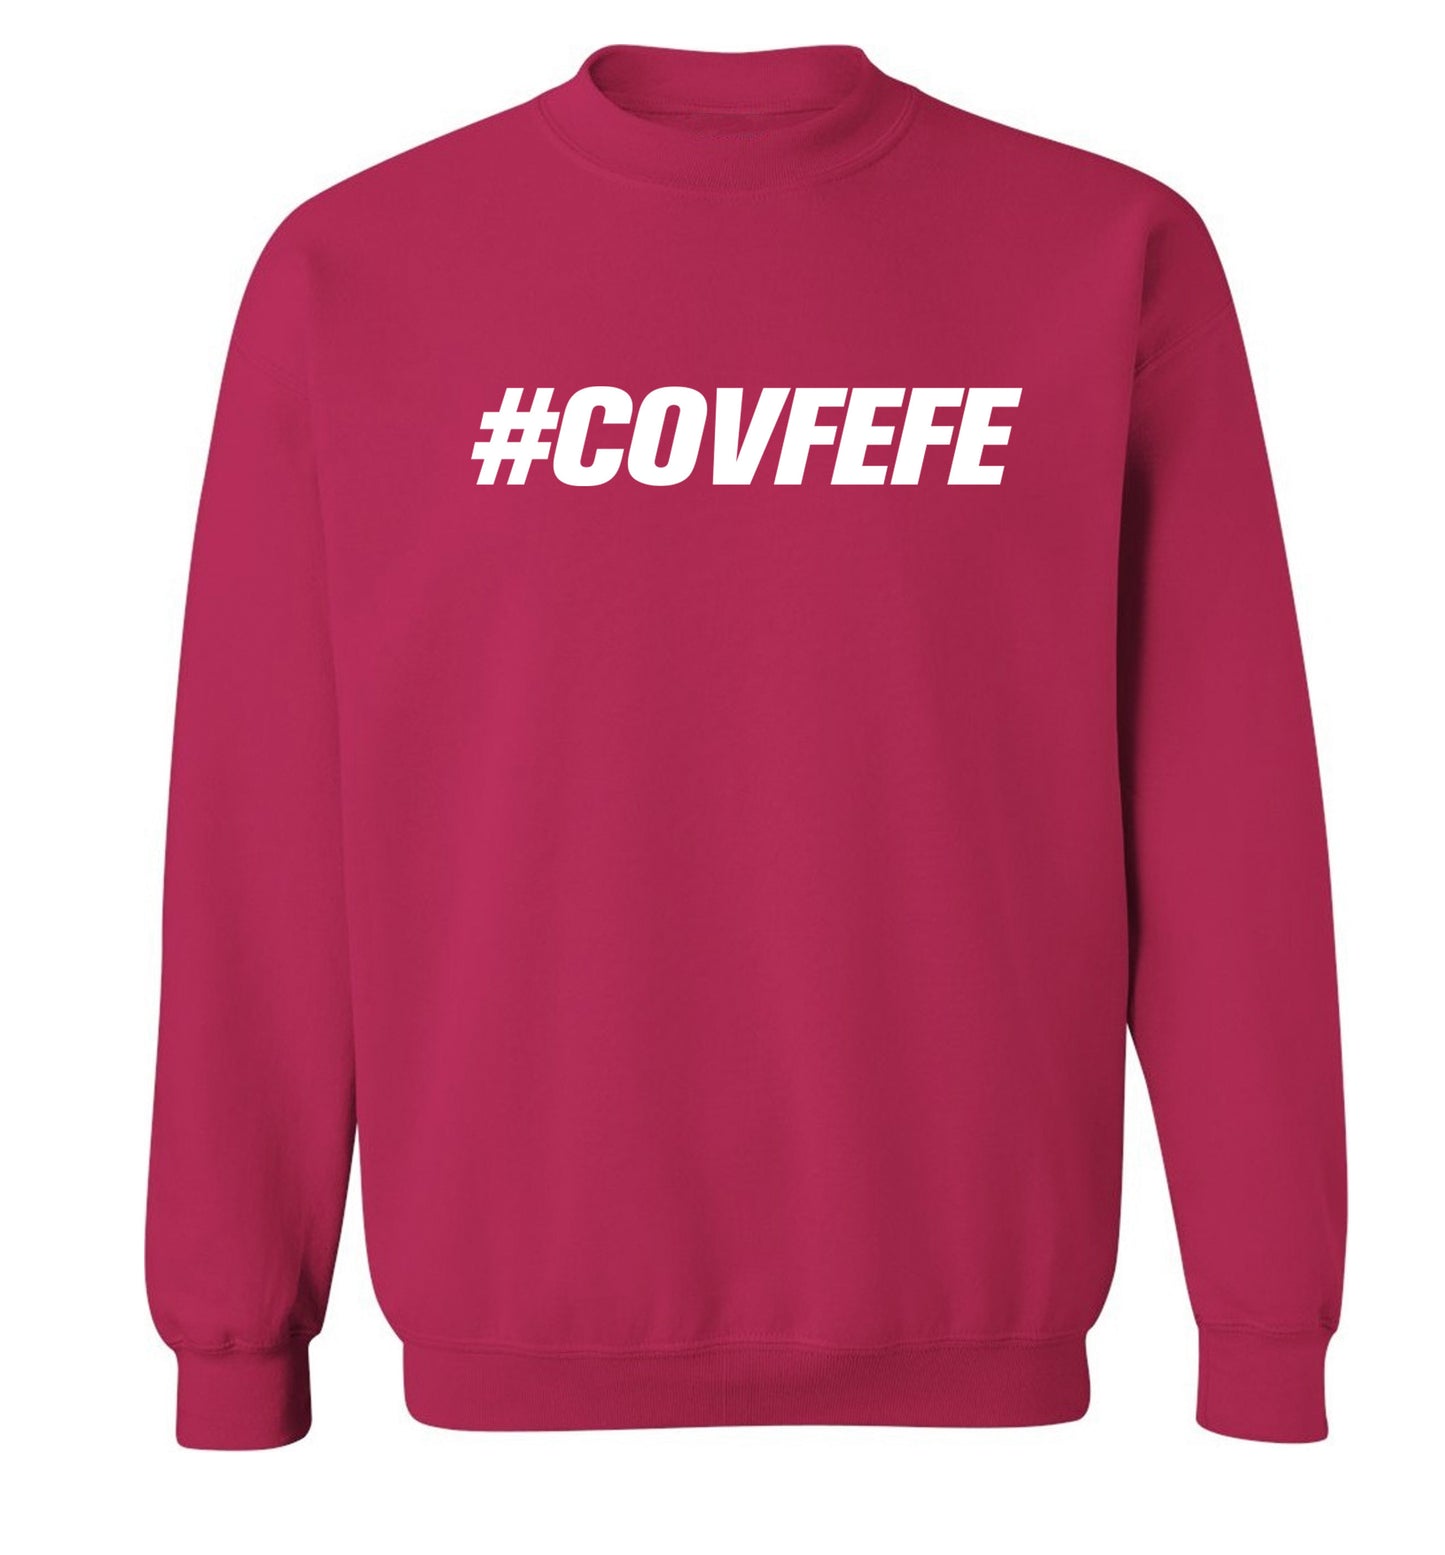 #covfefe Adult's unisex pink Sweater 2XL